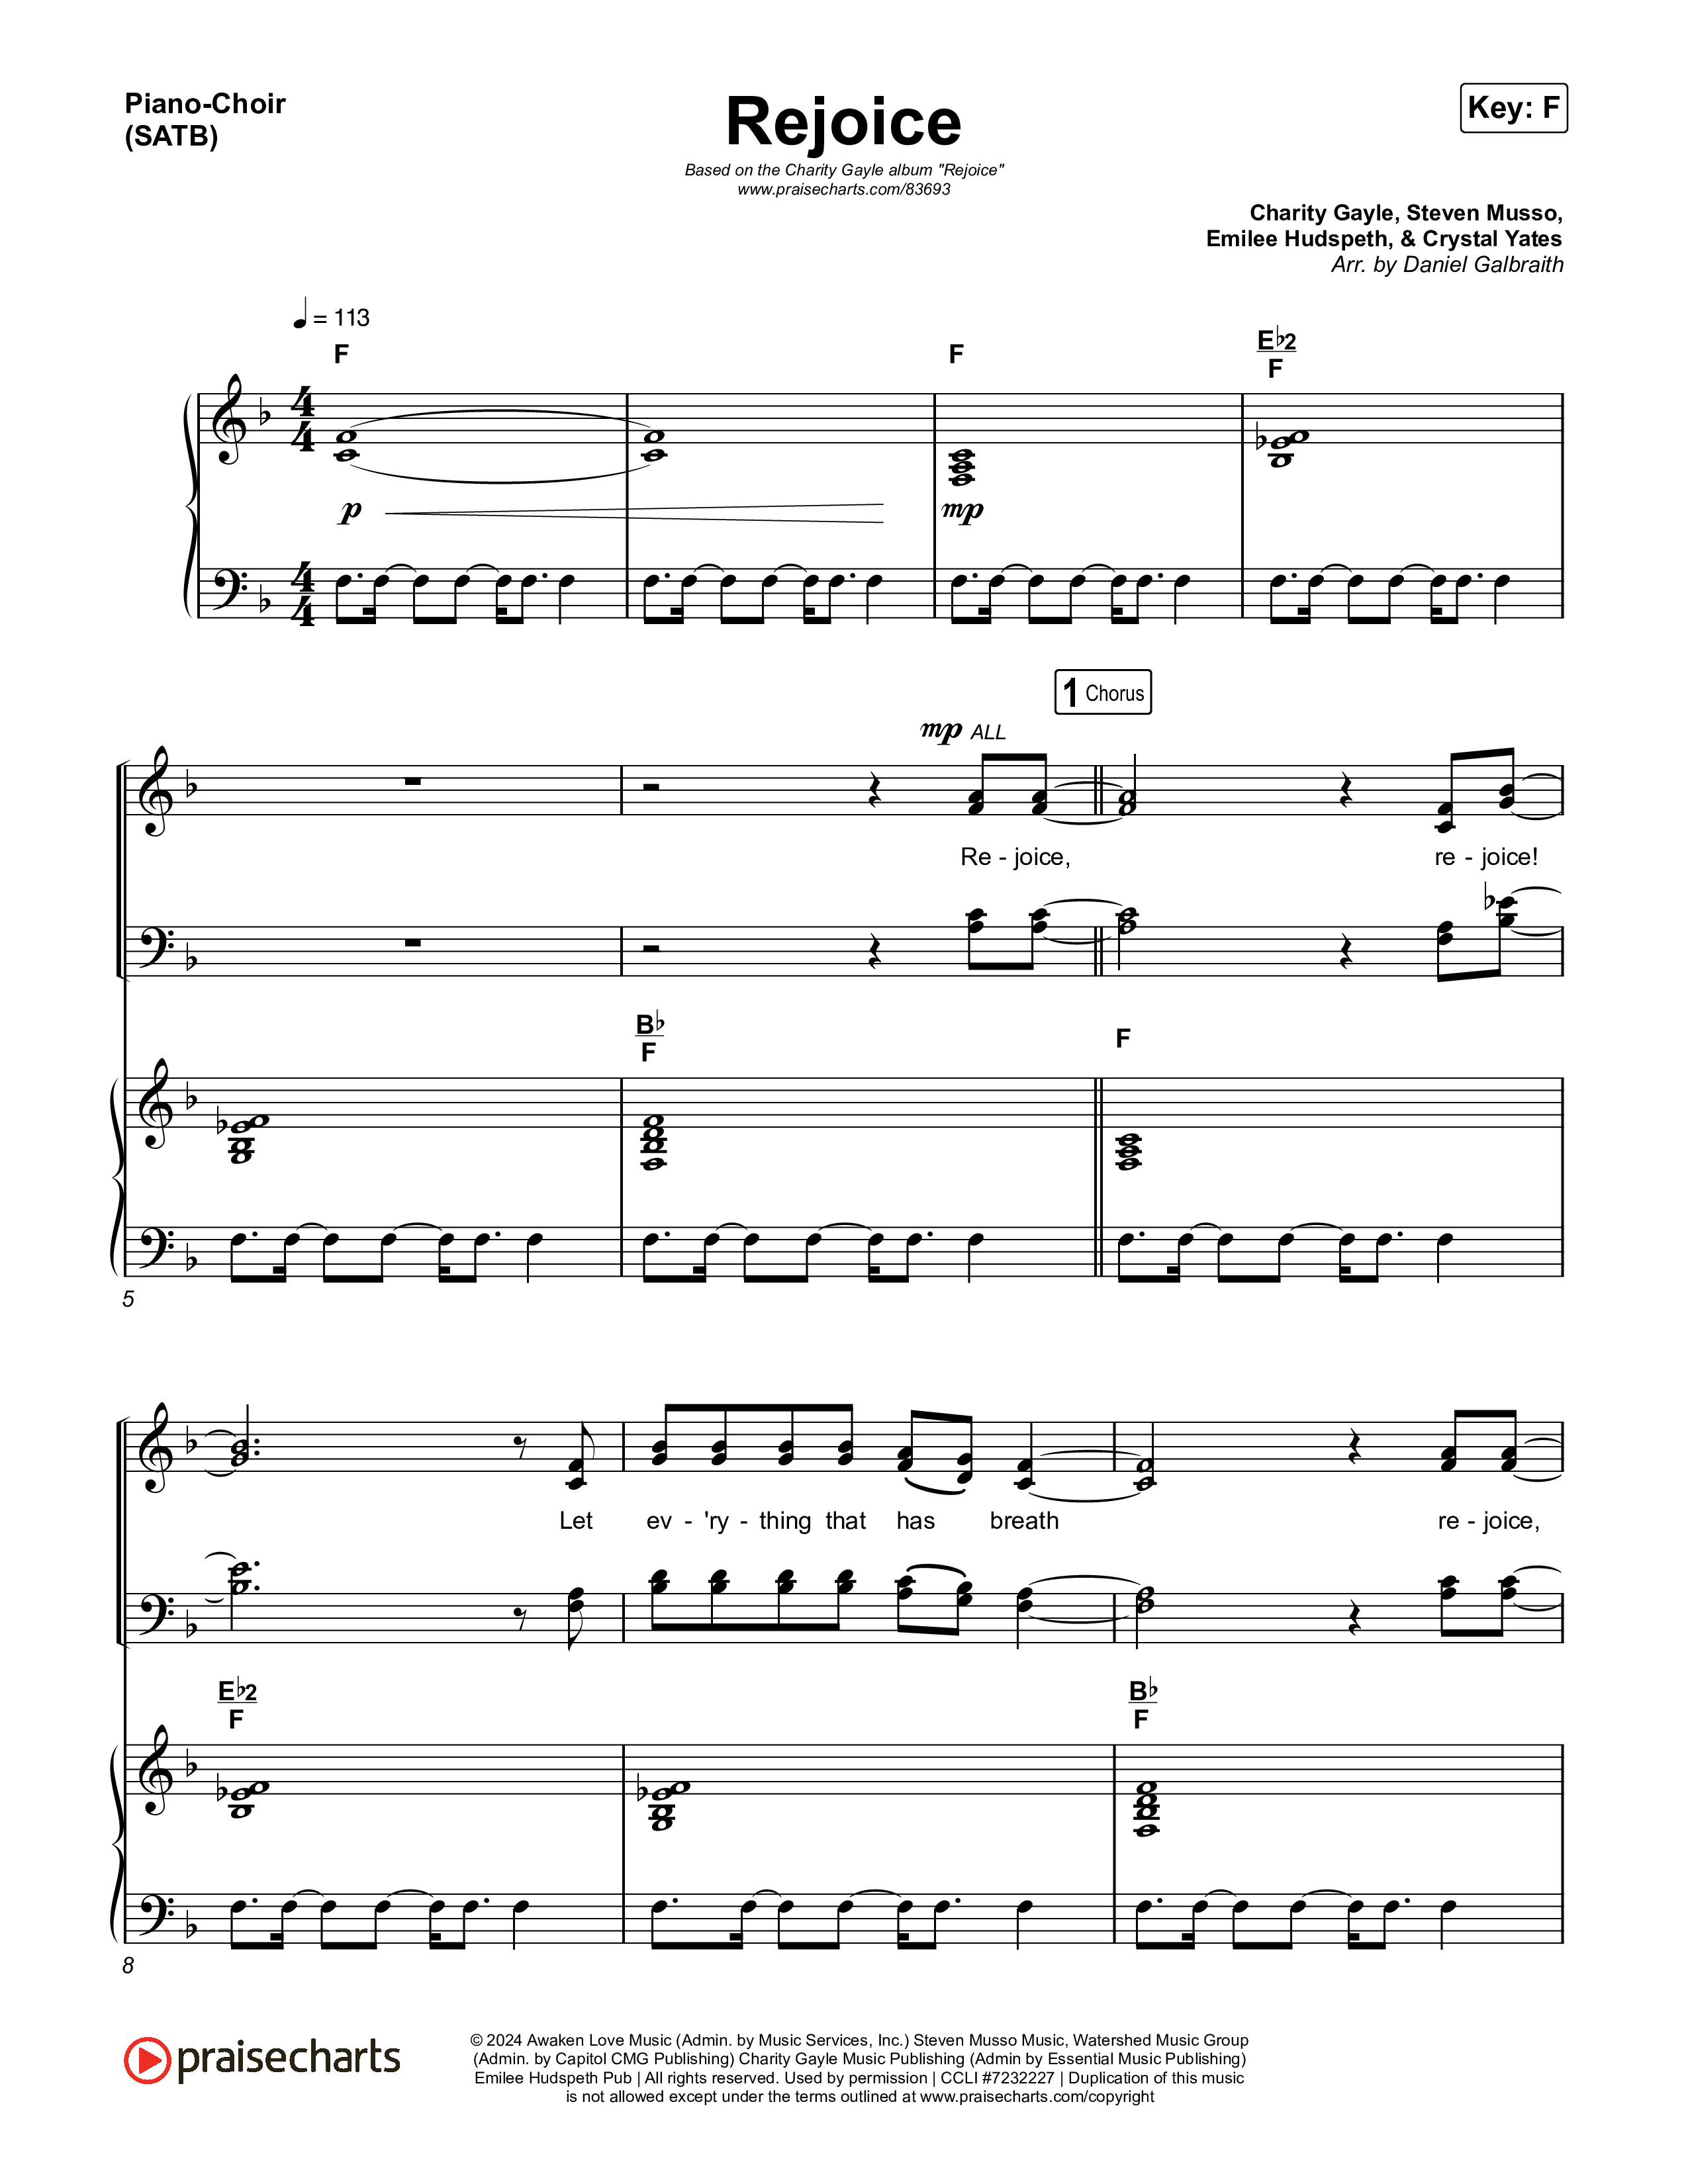 Rejoice Piano/Vocal (SATB) (Charity Gayle)